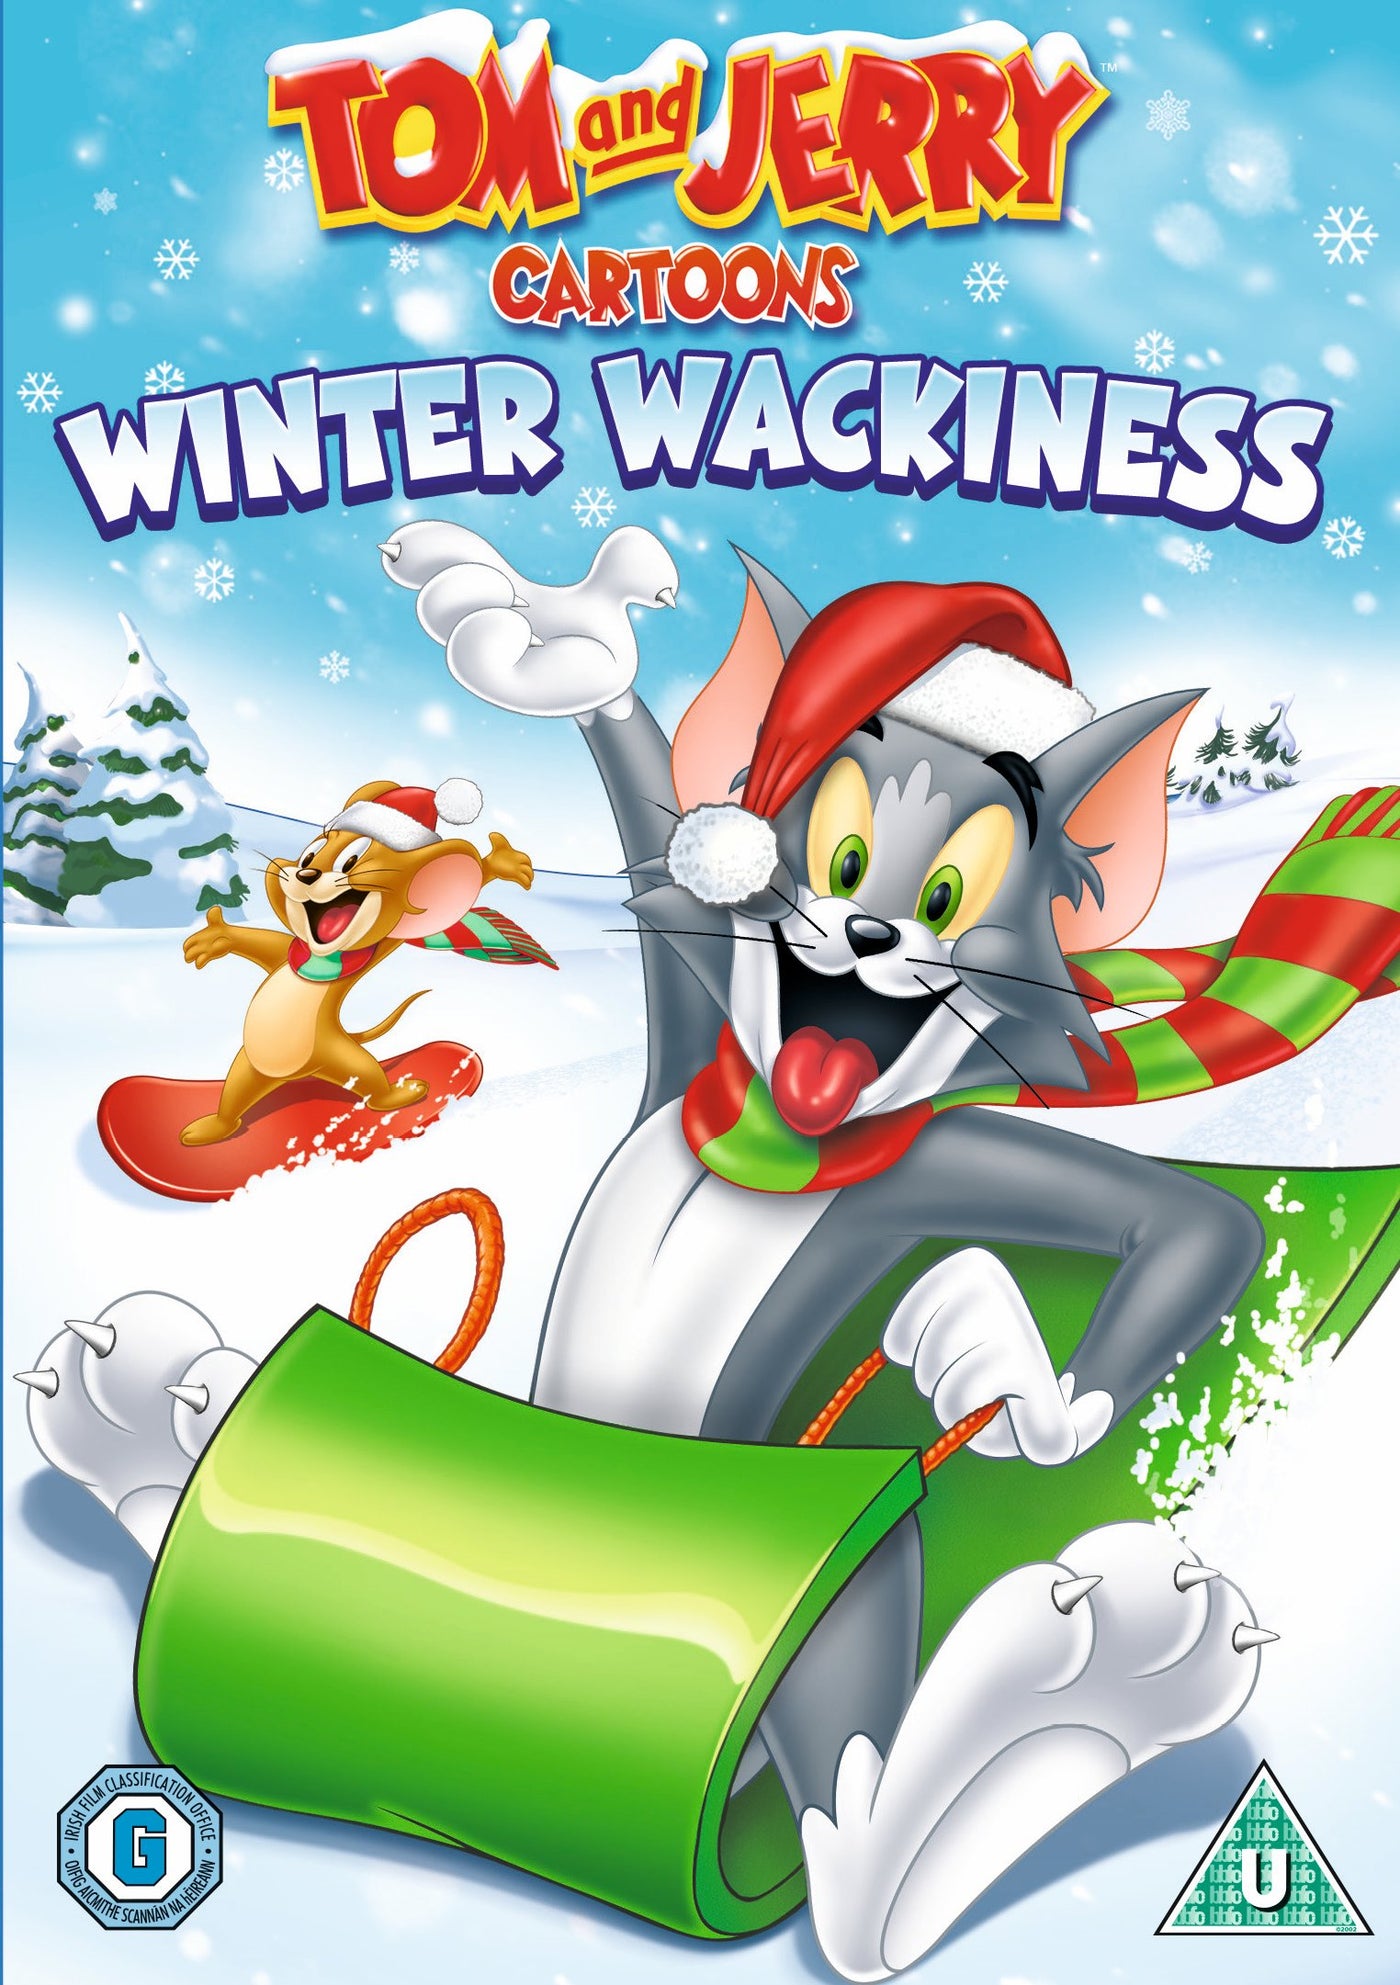 Tom And Jerry Winter Wackiness (DVD)